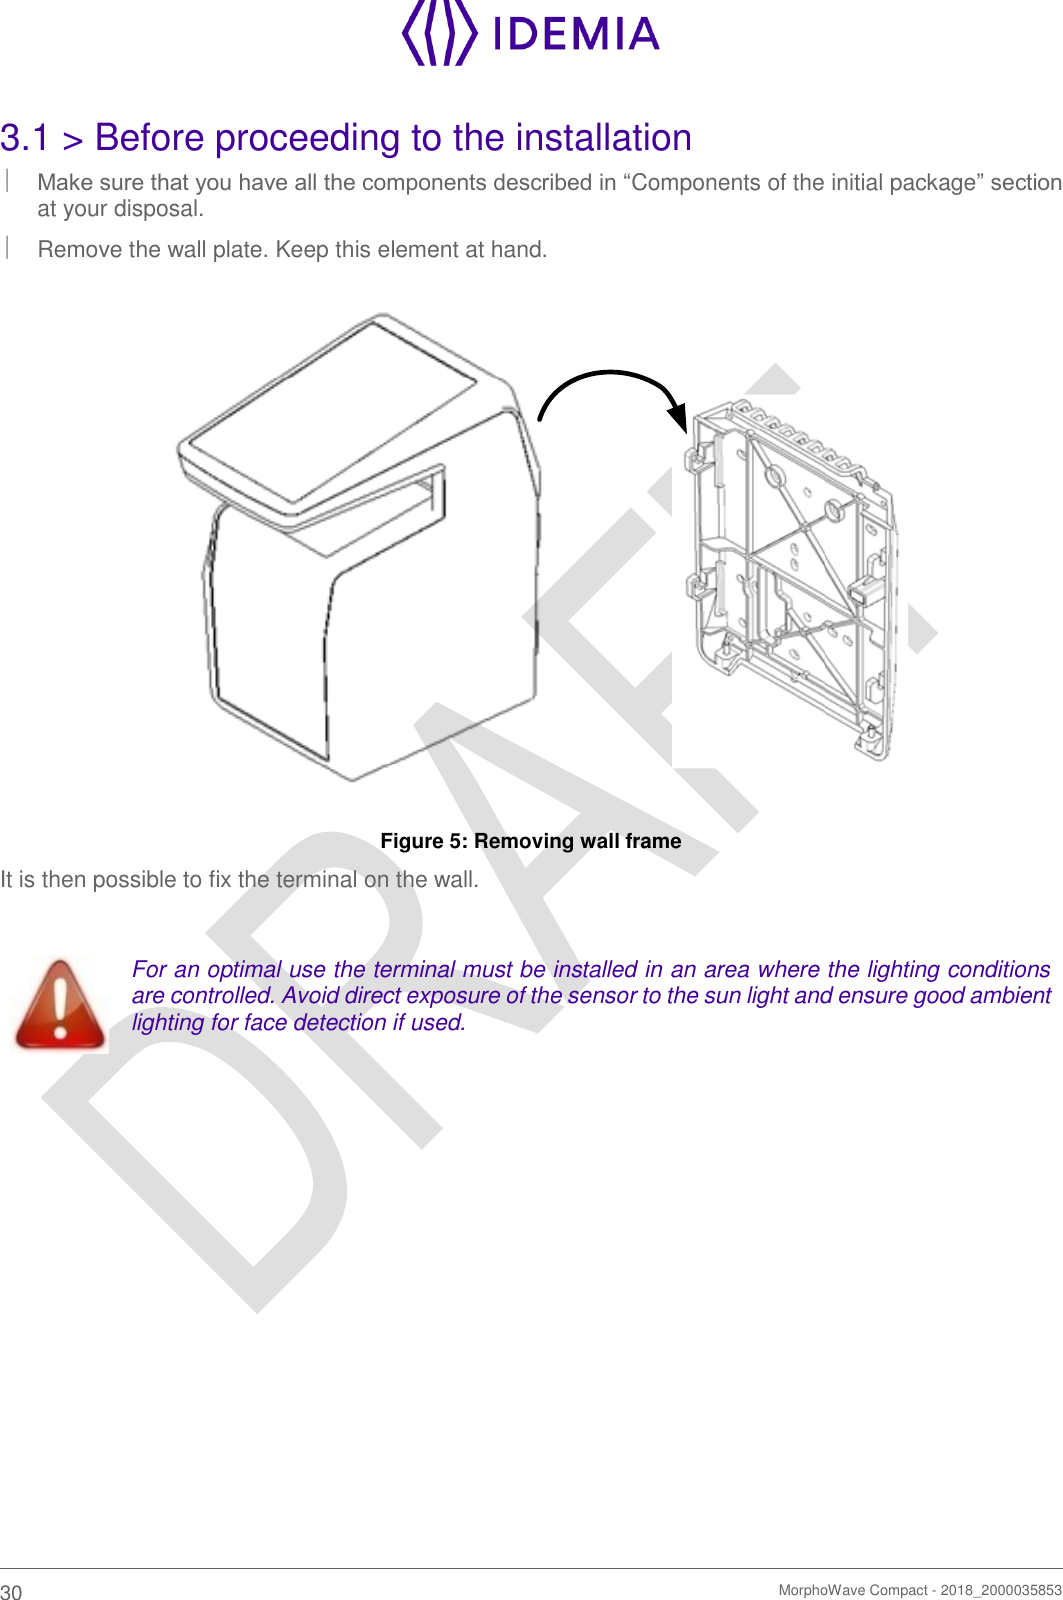    30   MorphoWave Compact - 2018_2000035853  3.1 &gt; Before proceeding to the installation  Make sure that you have all the components described in “Components of the initial package” section at your disposal.   Remove the wall plate. Keep this element at hand.  Figure 5: Removing wall frame It is then possible to fix the terminal on the wall.   For an optimal use the terminal must be installed in an area where the lighting conditions are controlled. Avoid direct exposure of the sensor to the sun light and ensure good ambient lighting for face detection if used.     